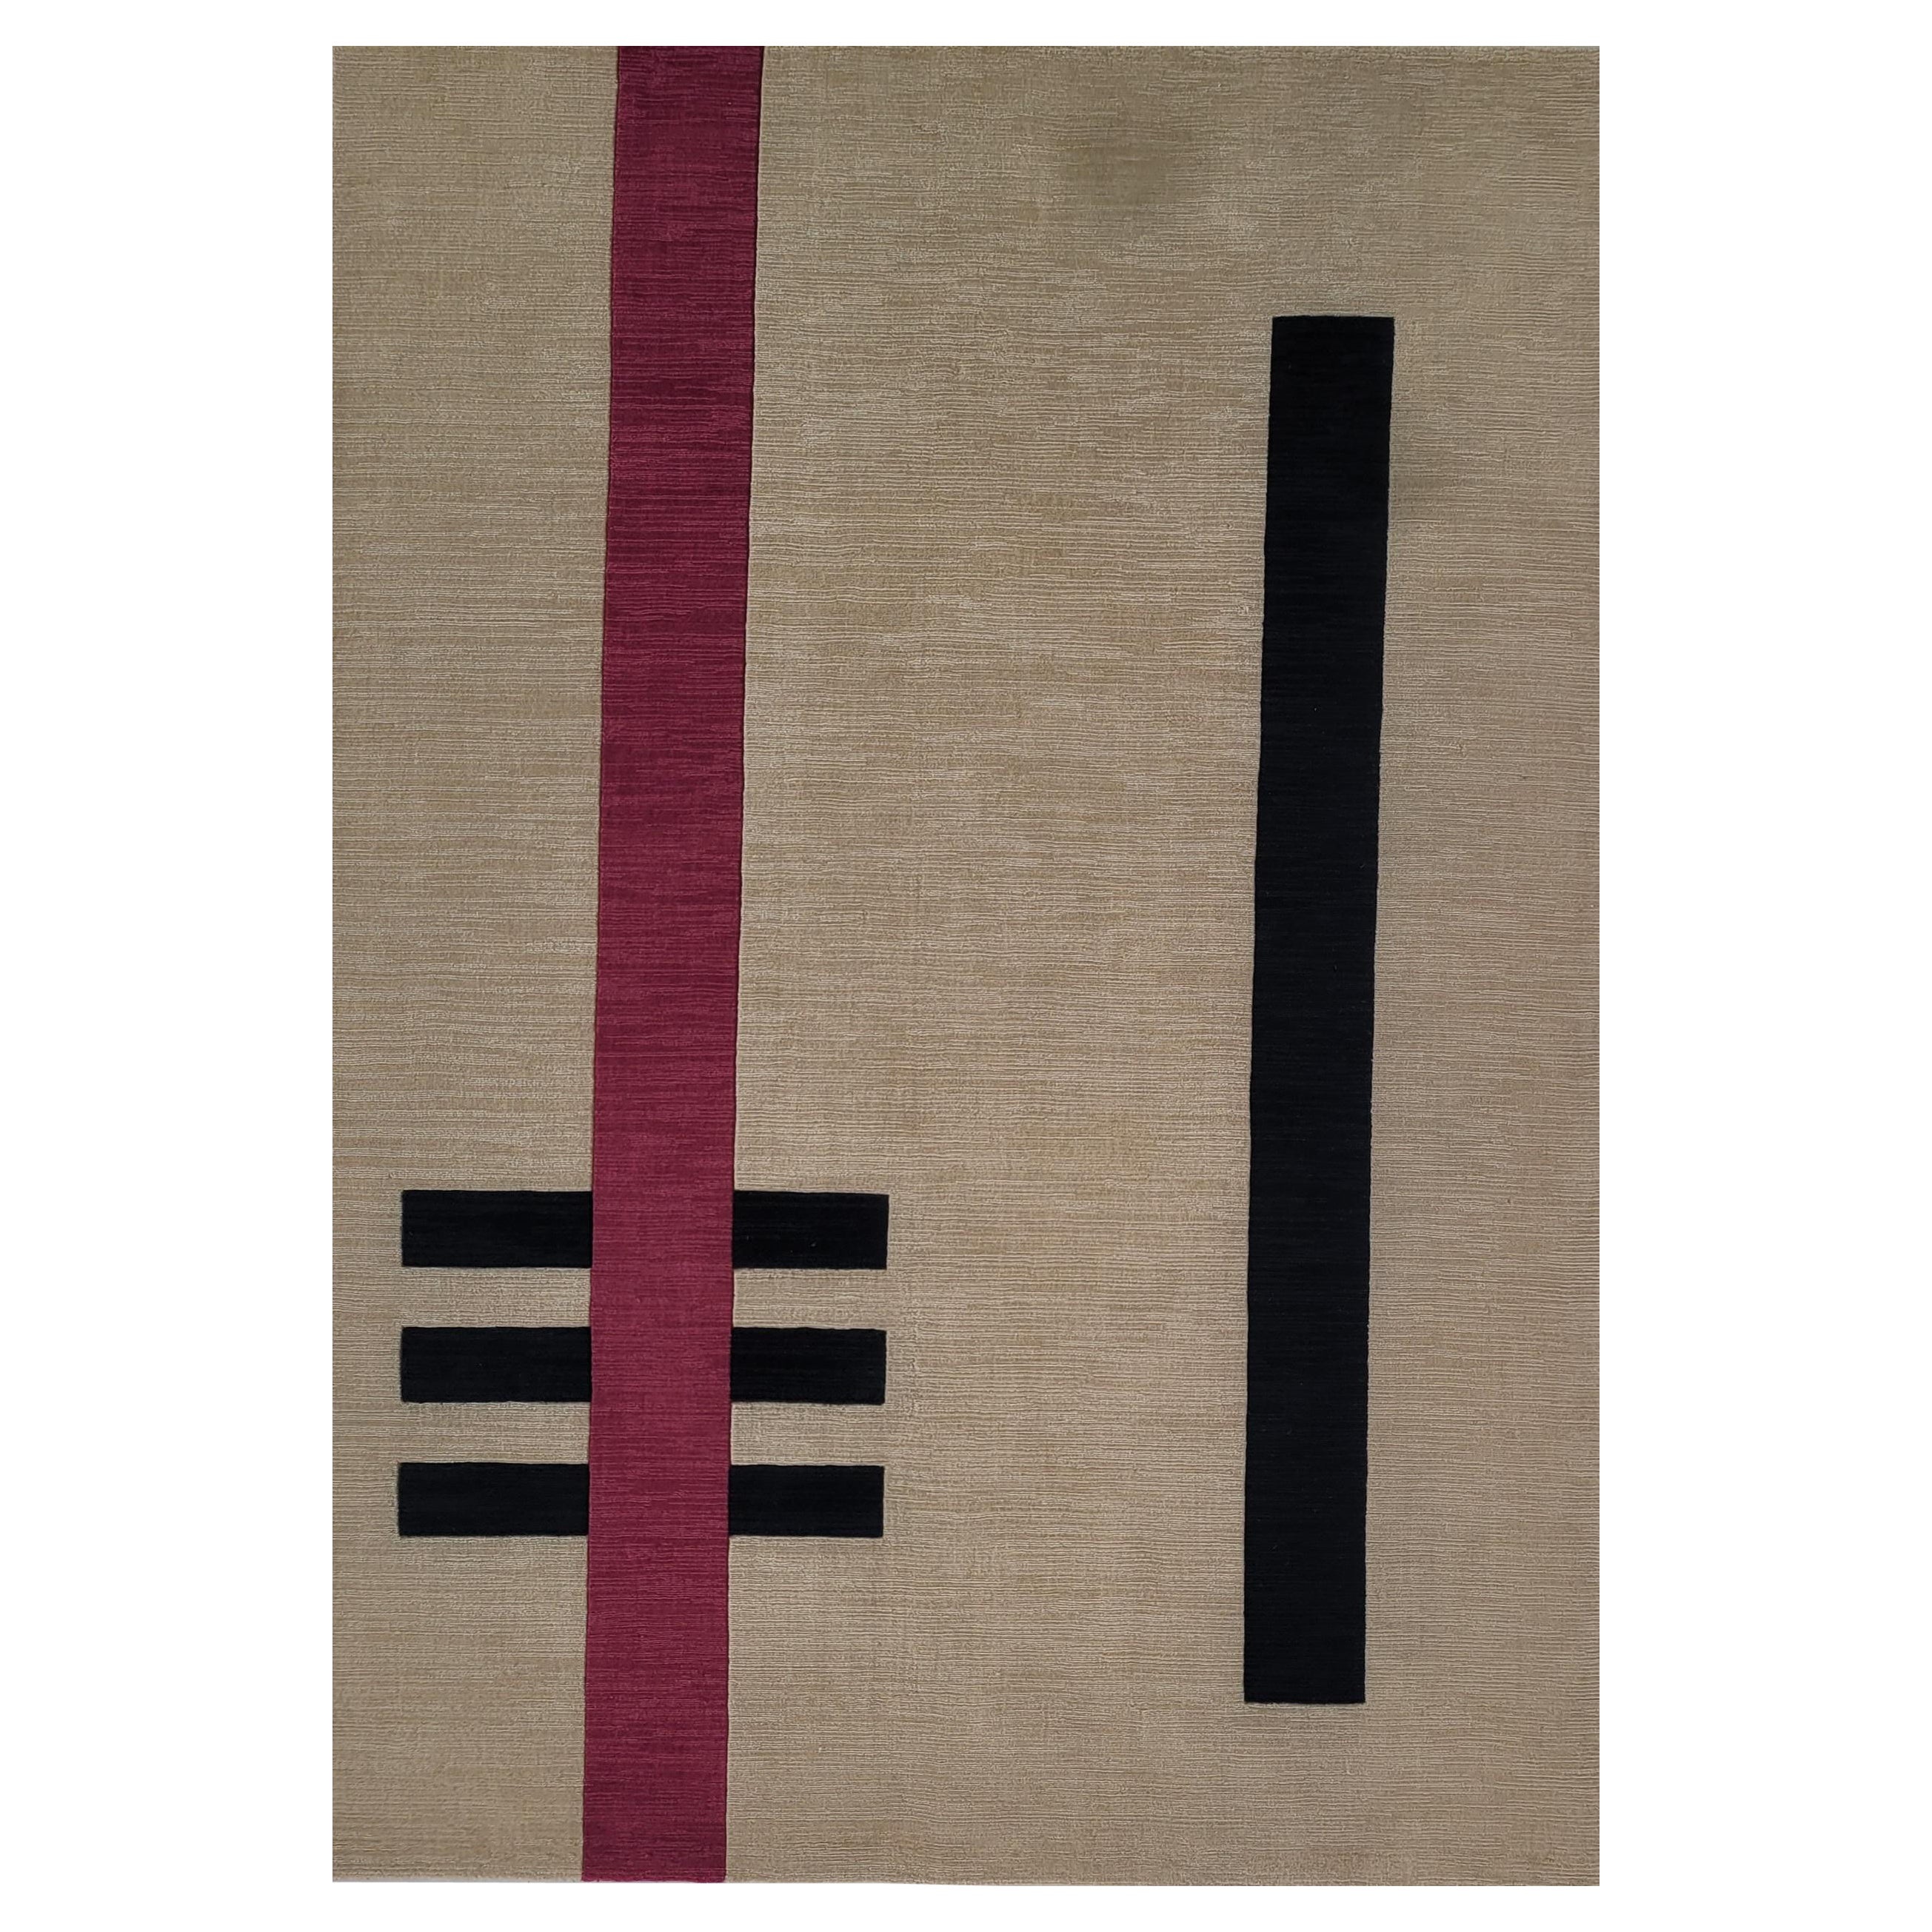  carpet pink and black lines through an earthen beige background, hand woven rug